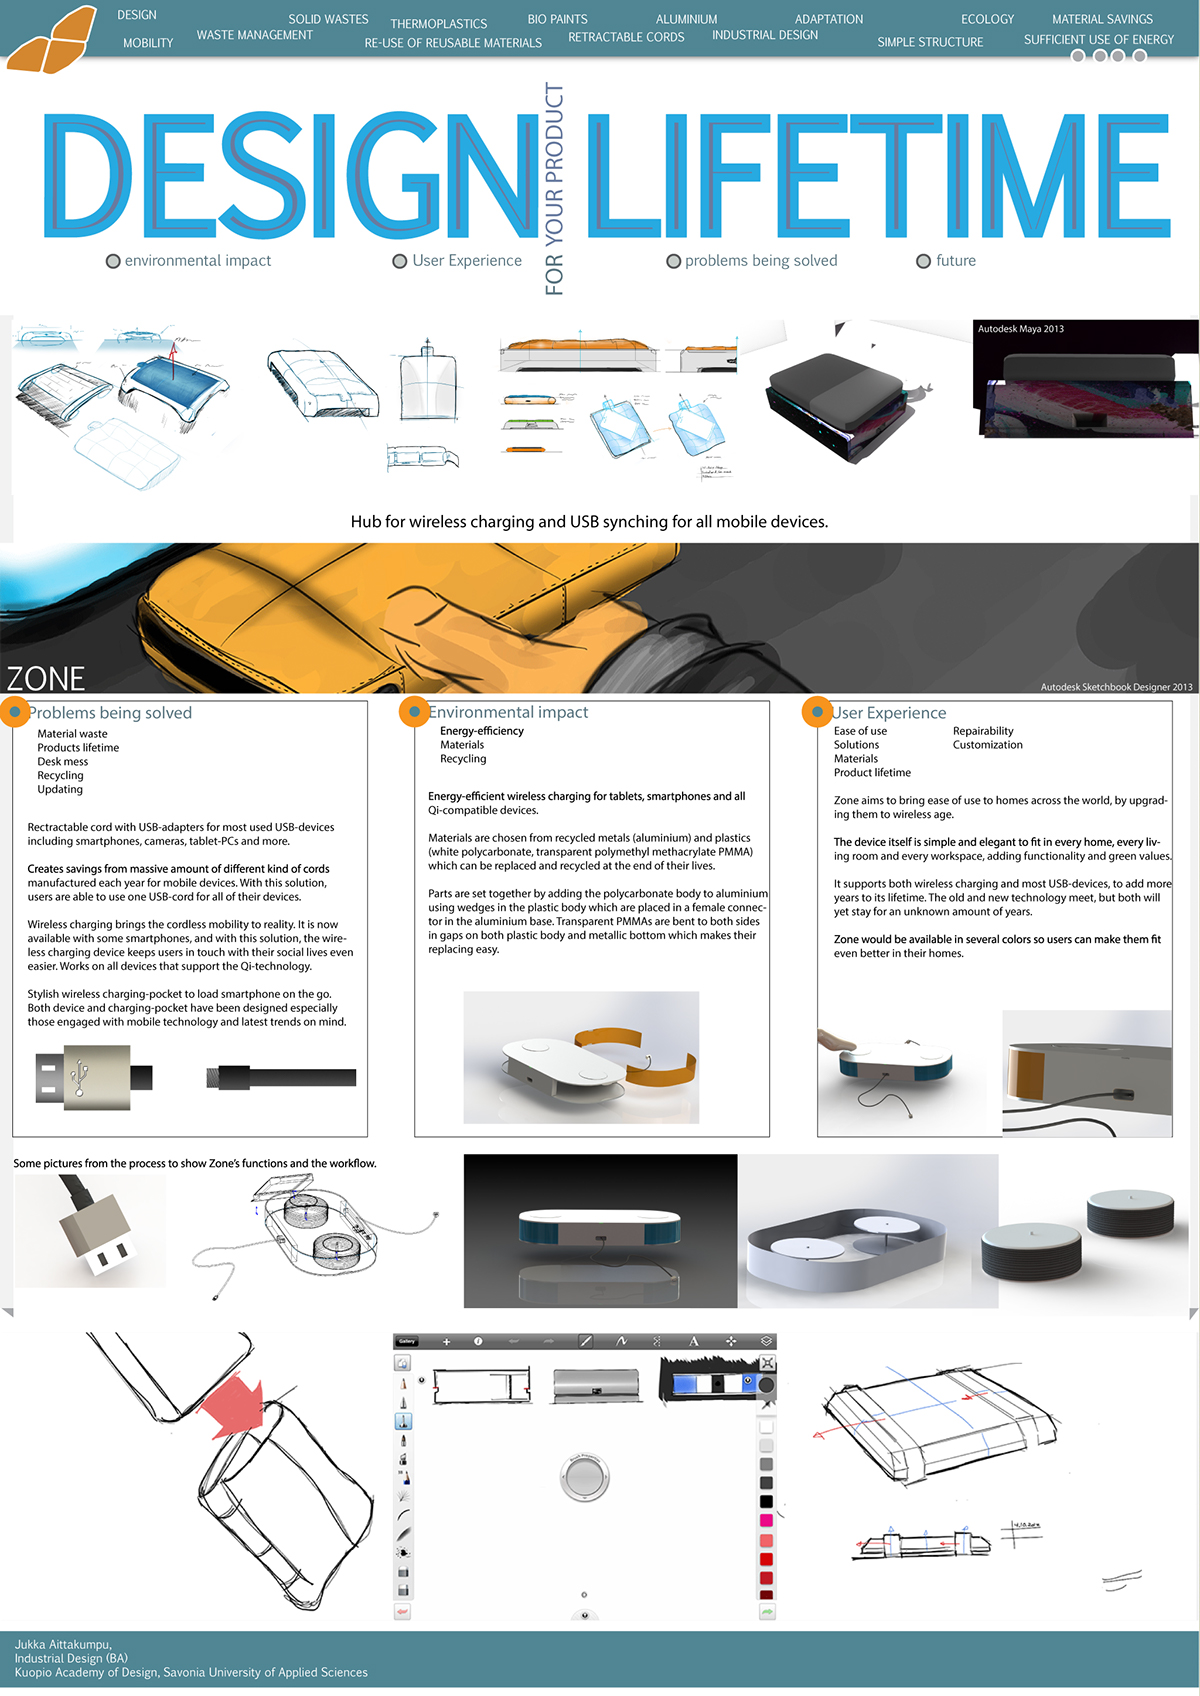 Autodesk ifixit Design Sketching design Competition challenge 3D Modelling